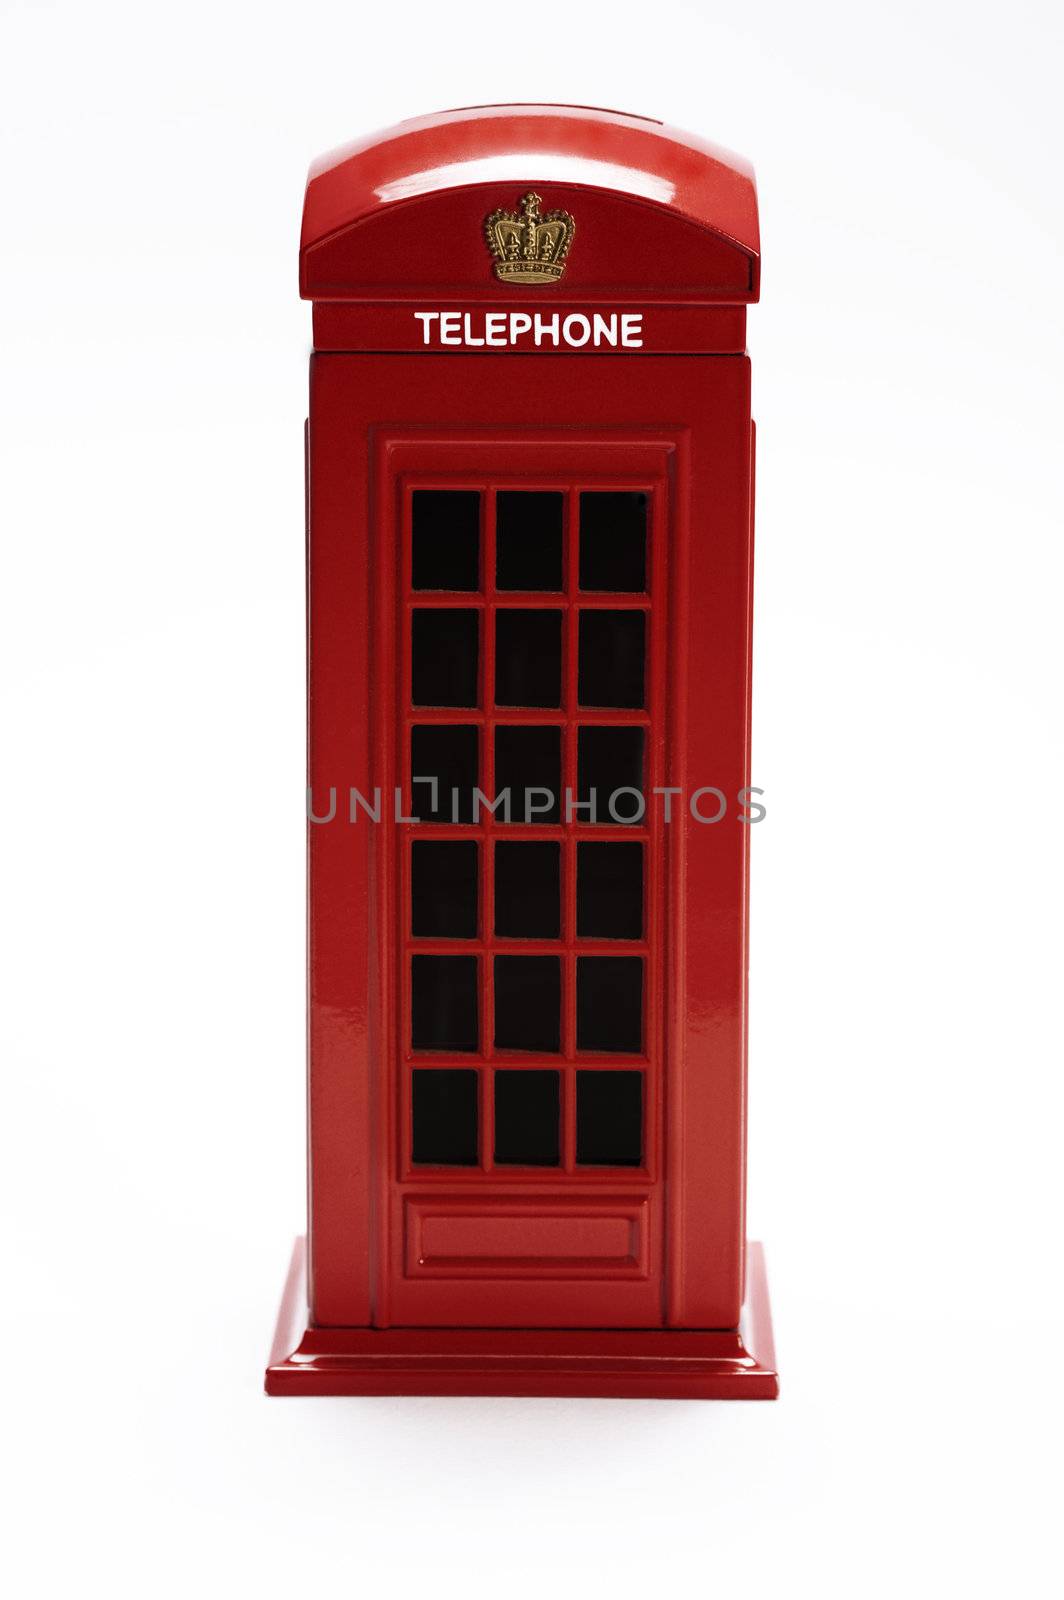 classic british telephone booth isolated on white background